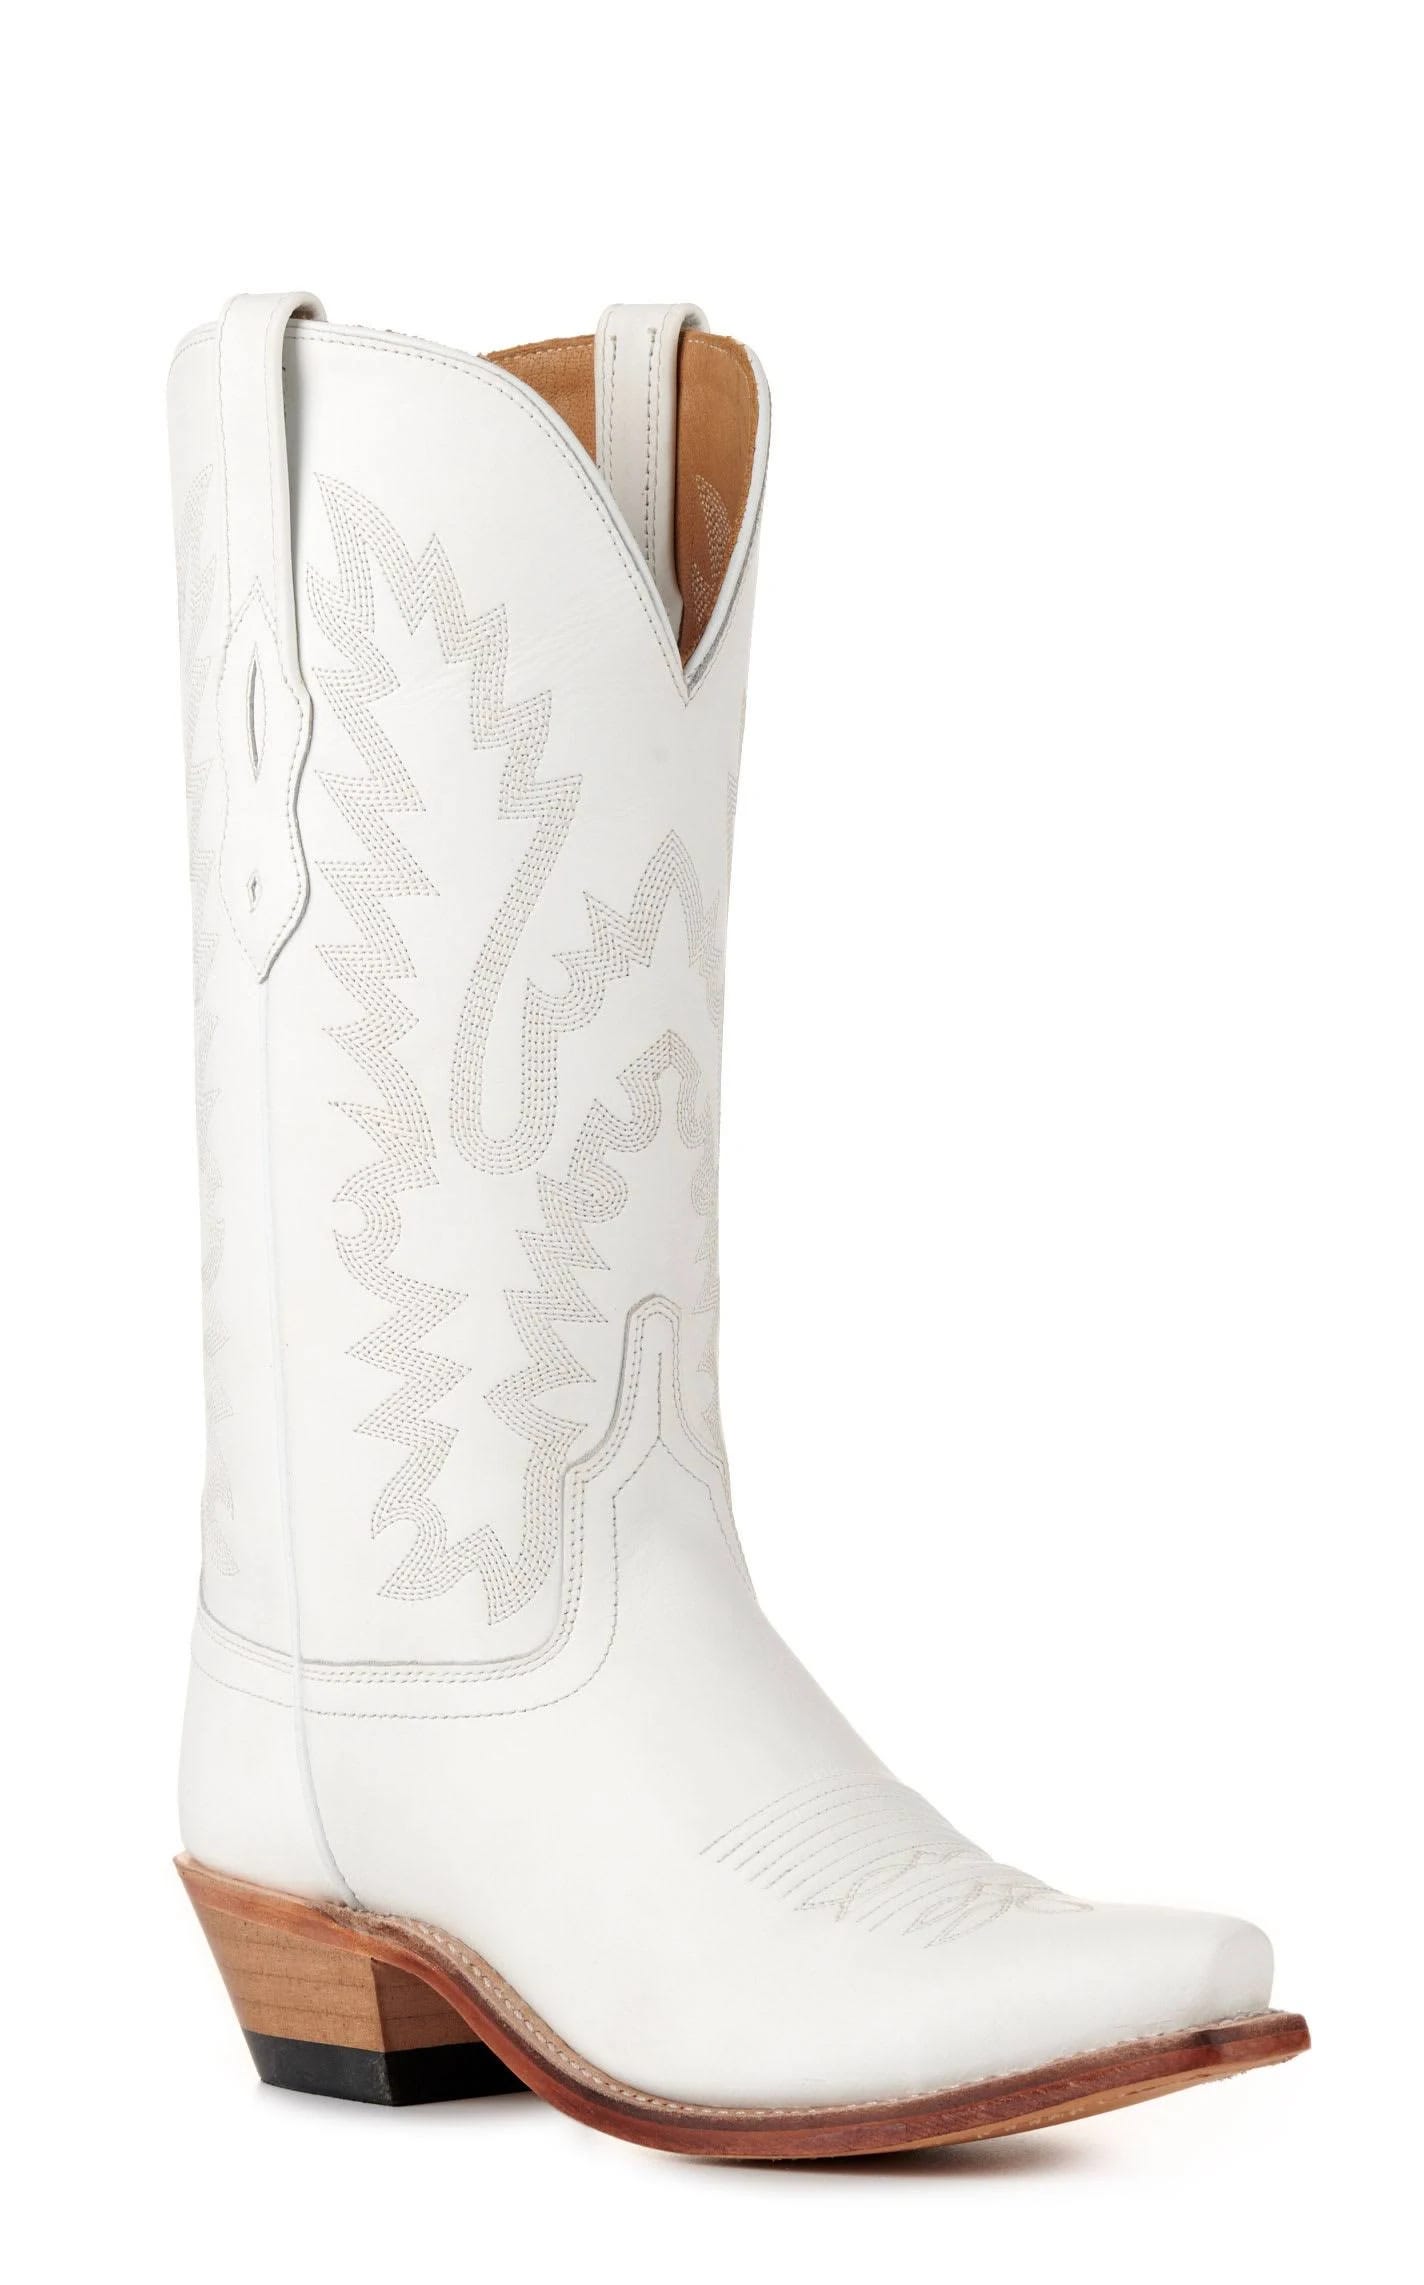 Stylish White Cowboy Boots for Adventure | Image